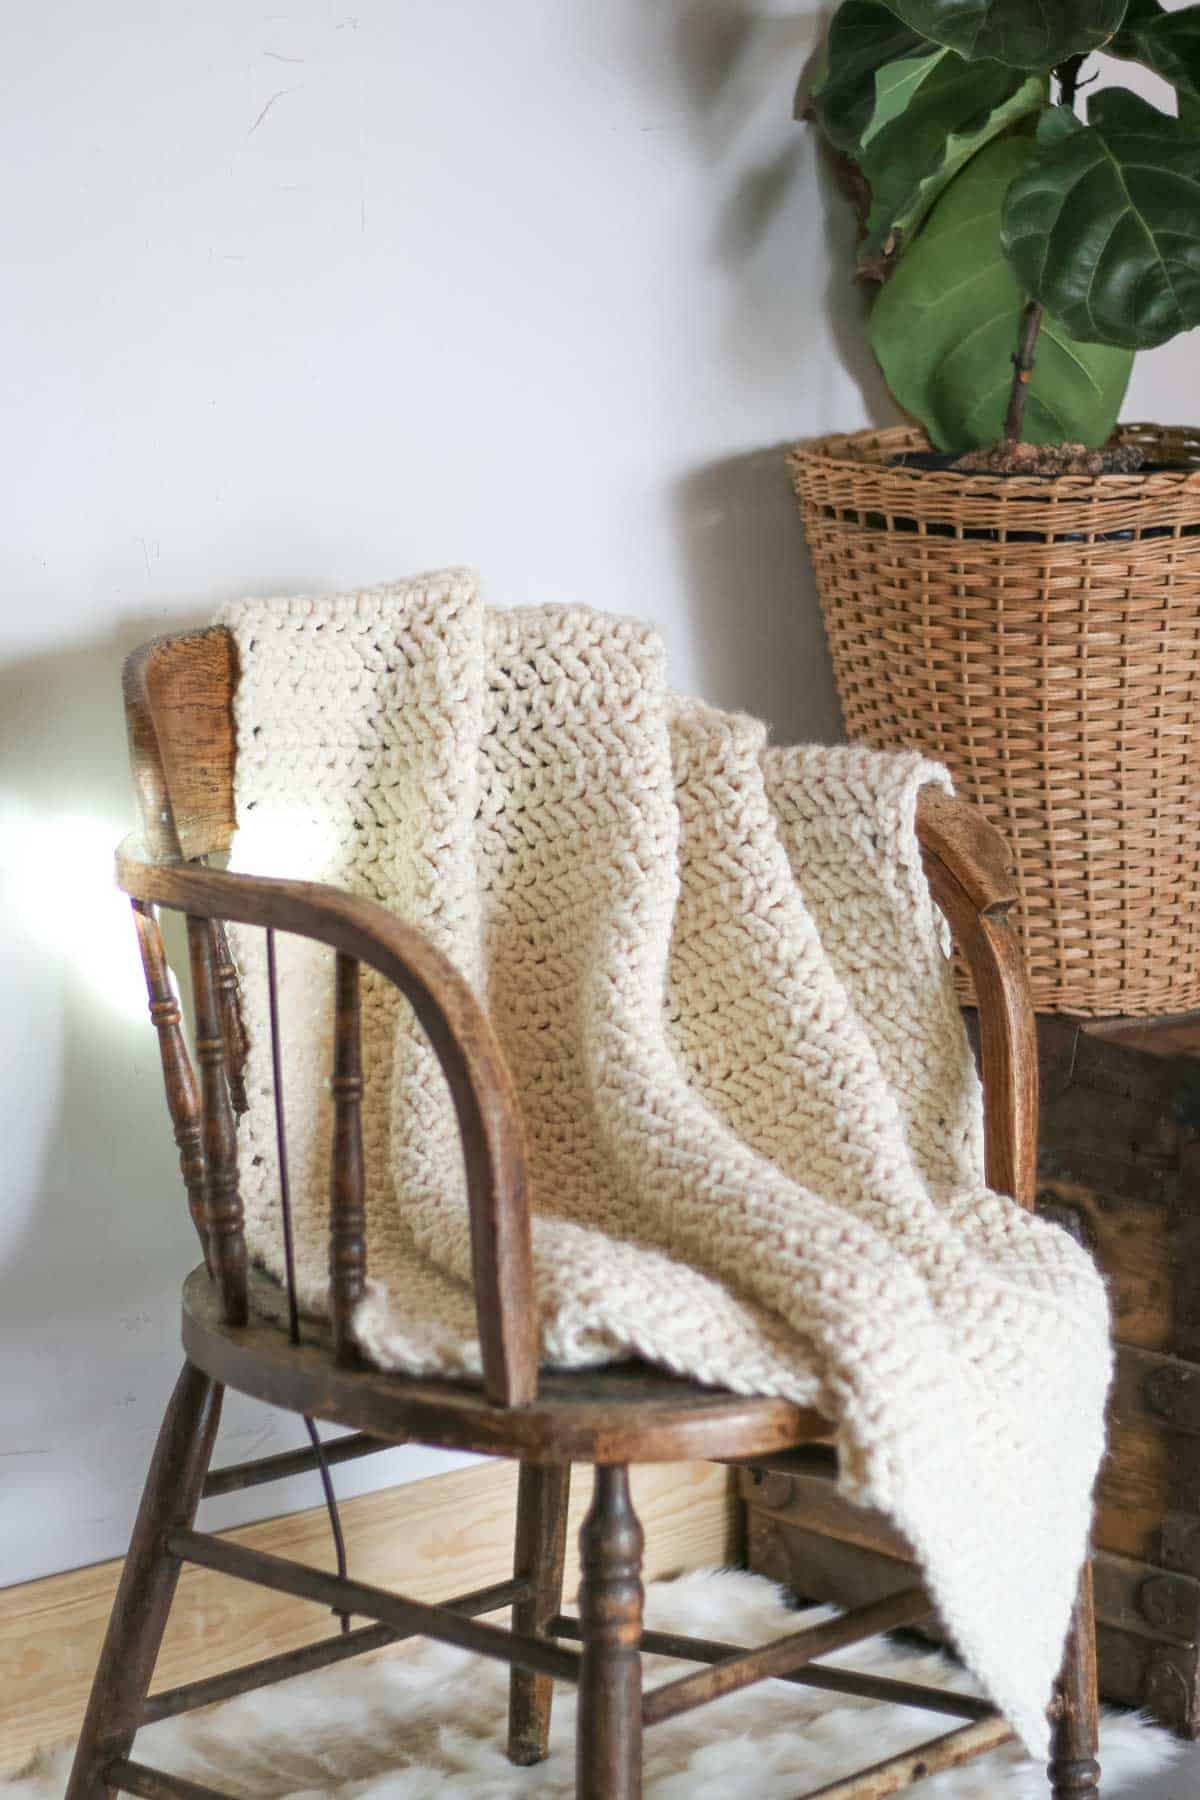 A simple crochet blanket draped over a wooden chair.